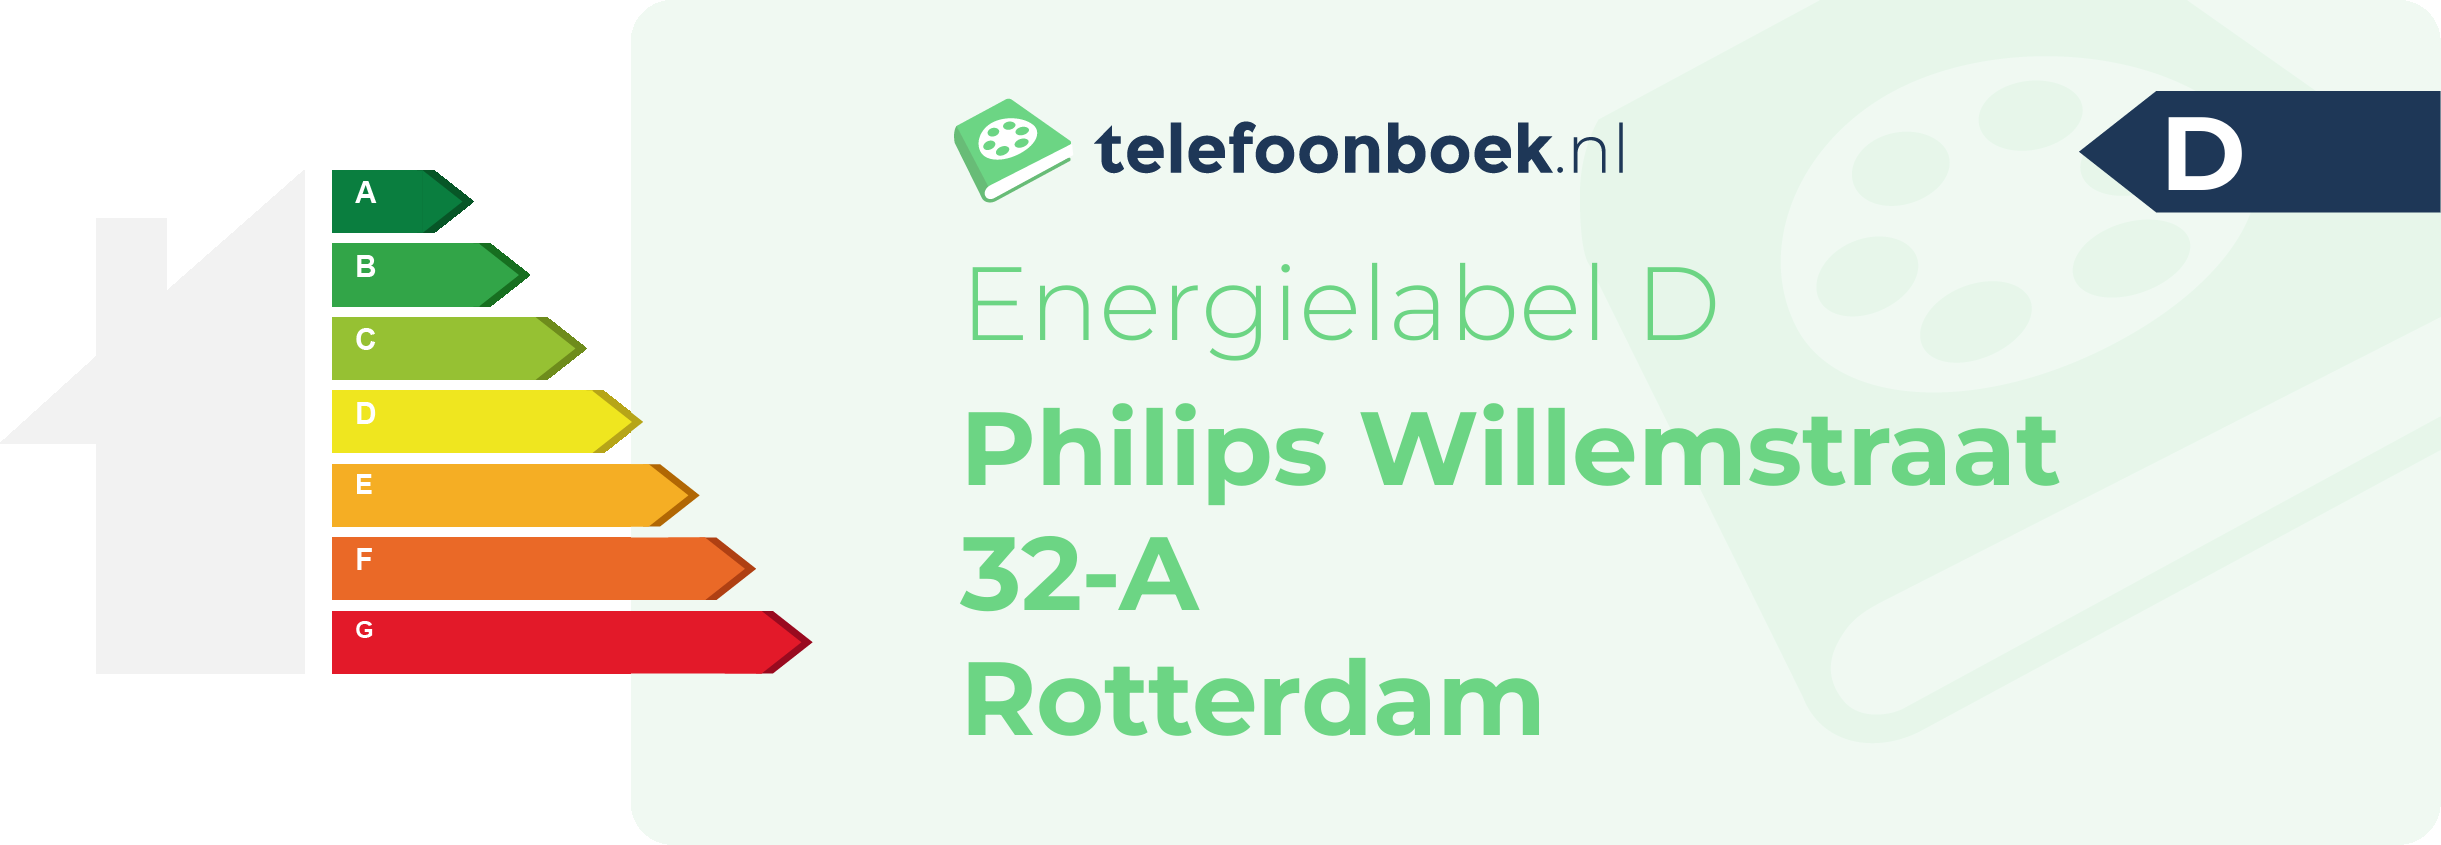 Energielabel Philips Willemstraat 32-A Rotterdam